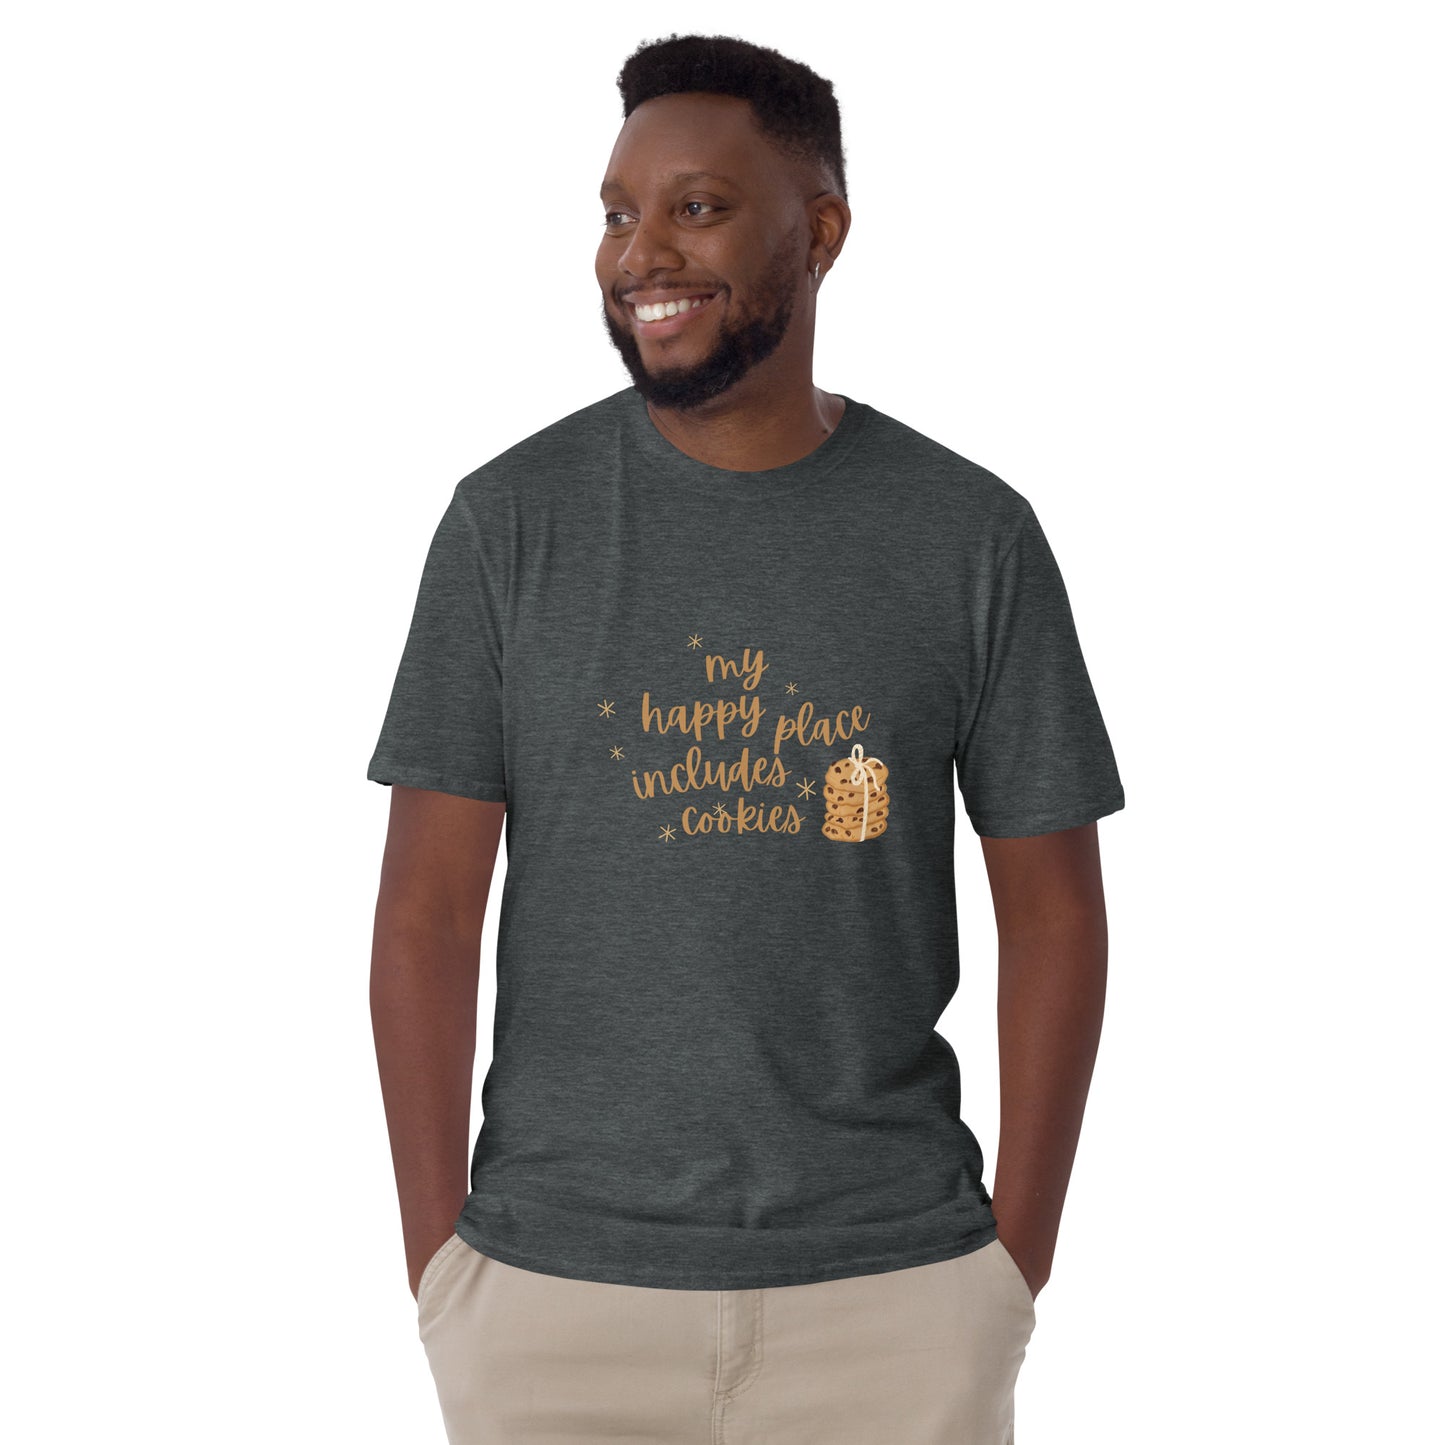 My Happy Place Includes Cookies - Short-Sleeve Unisex T-Shirt ~ Sharon Dawn Collection (Sale Price: $44.19 CAD)